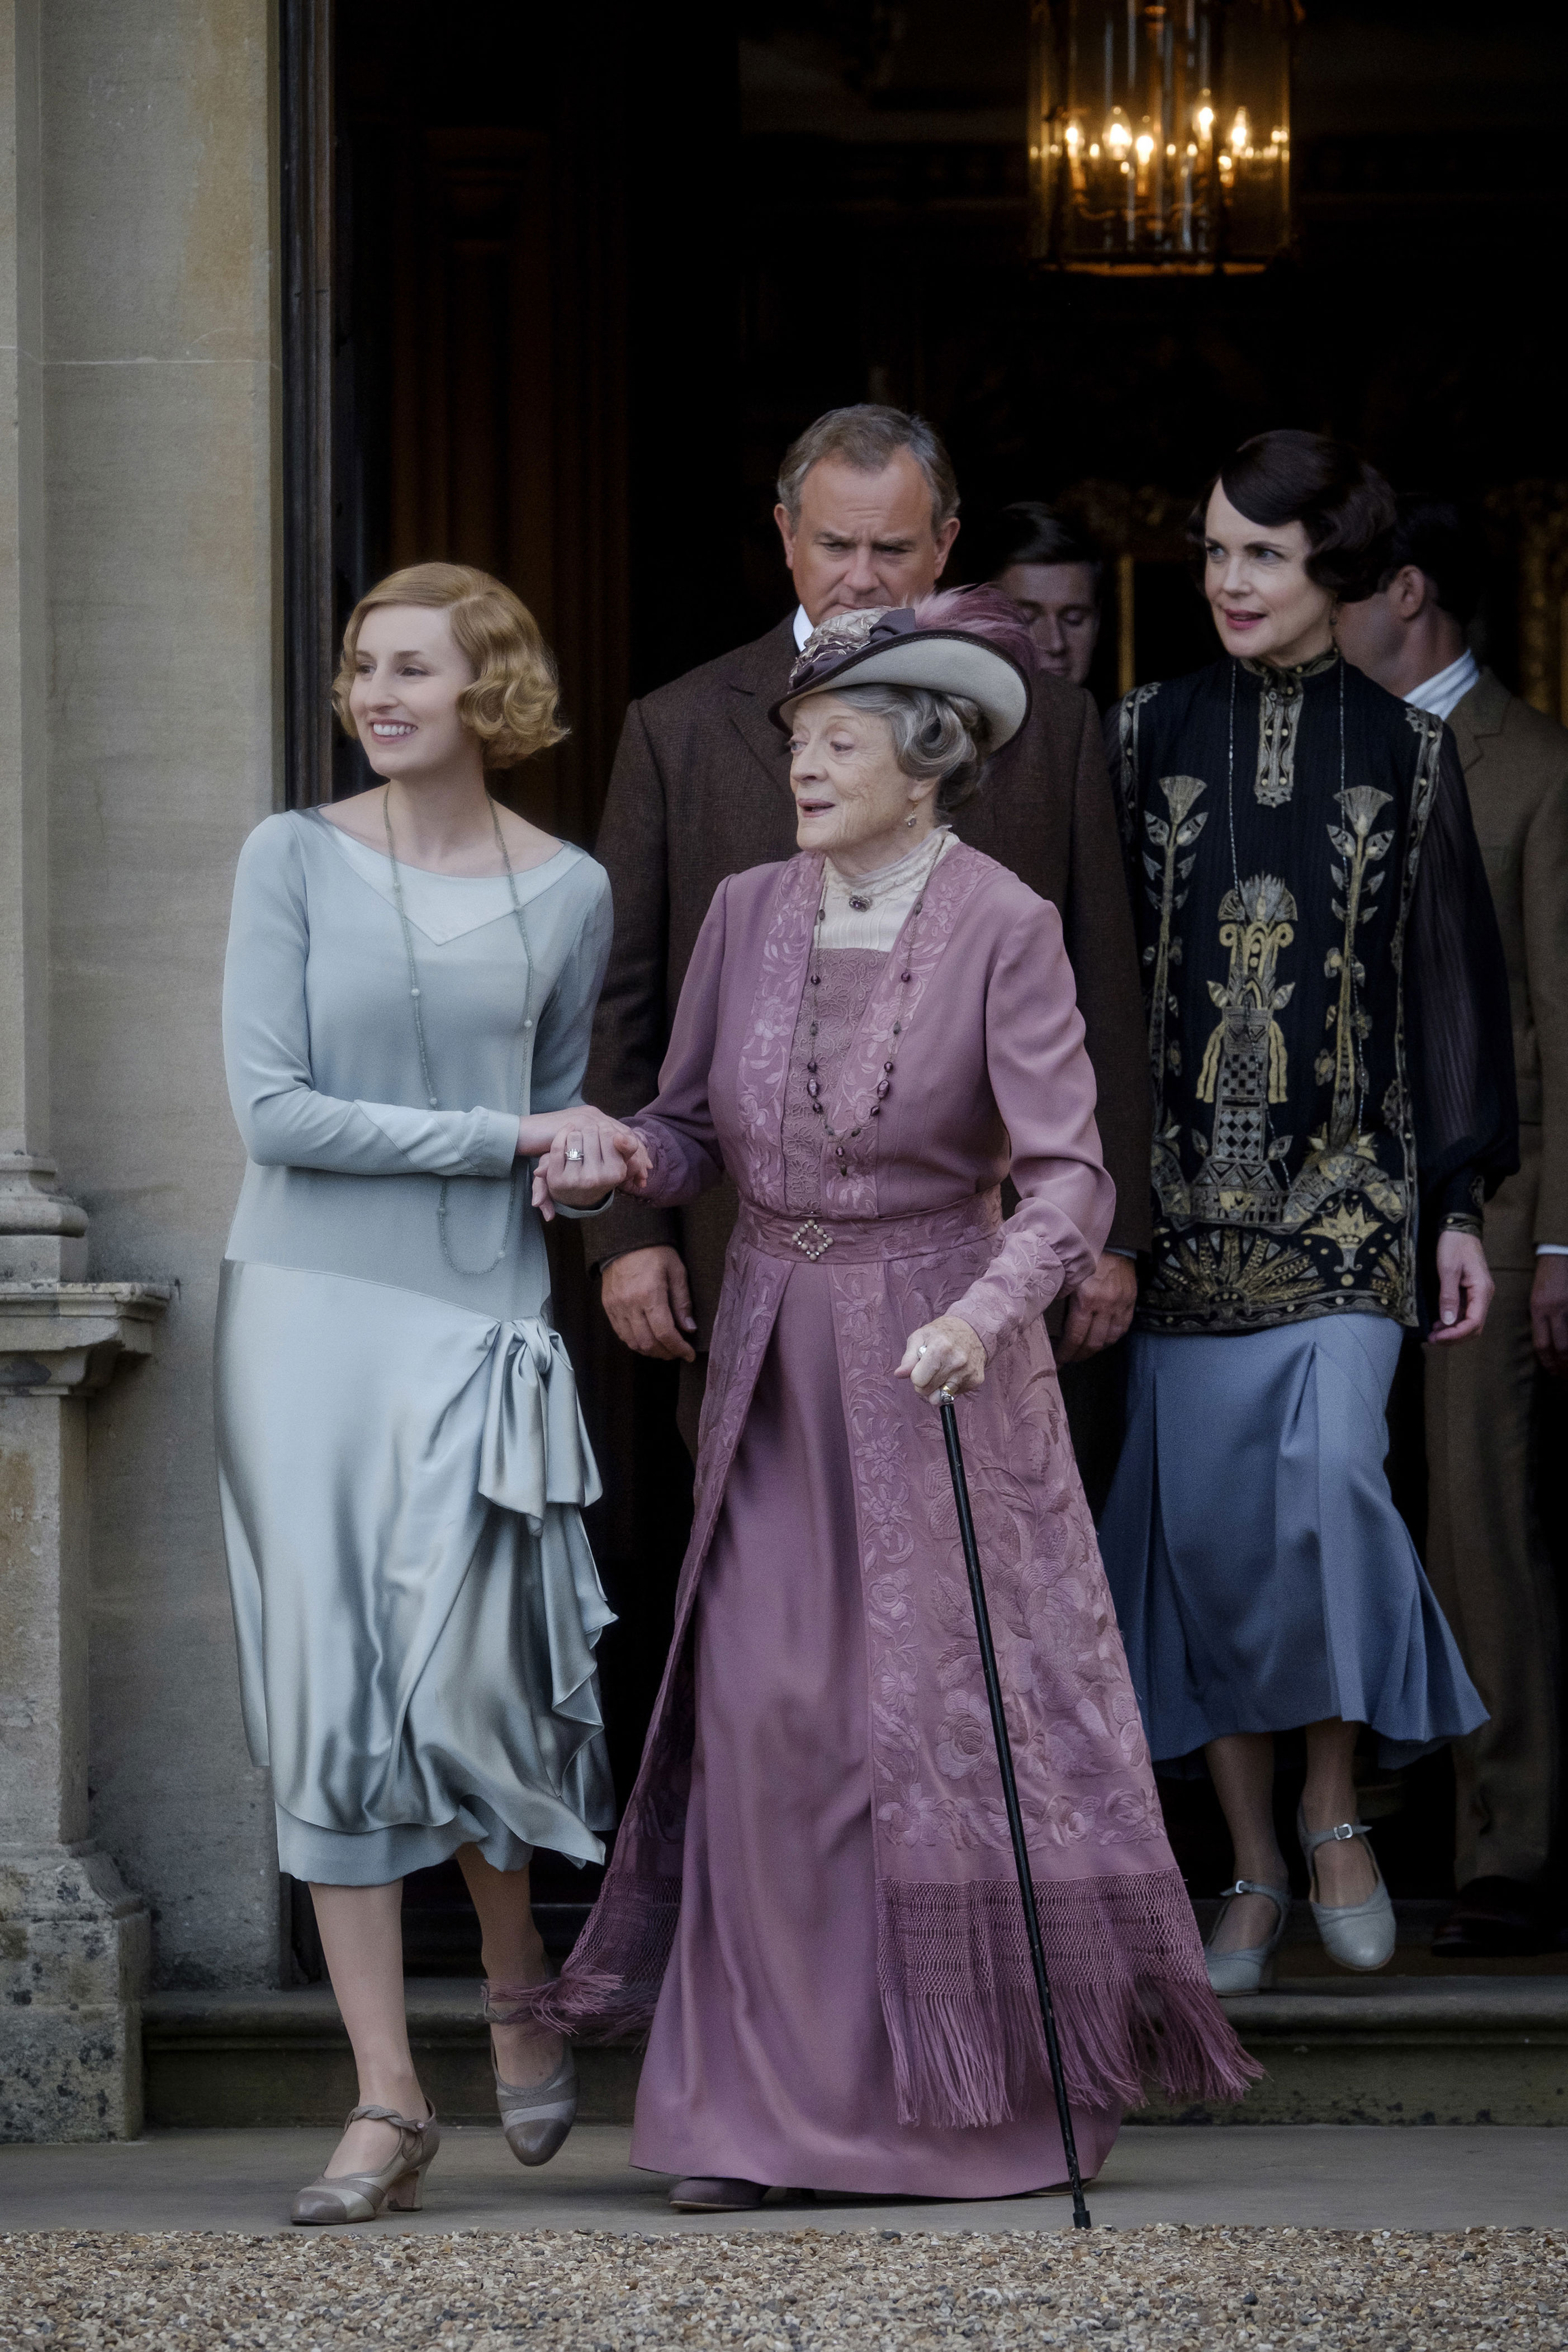 <p>While Laura Carmichael (as Lady Edith), Maggie Smith (as the Dowager Lady Grantham) and Hugh Bonneville (as Lord Grantham) were certainly dressed to impress in this scene from the 2019 "Downton Abbey" movie, it was Elizabeth McGovern (as Lady Grantham) whose look really caught the eye. "I found this silk tulle scarf with the most amazing deco embroidery in metallic thread and normal silk thread," costume designer Anna Mary Scott Robbins told <a href="https://fashionista.com/2019/09/downton-abbey-movie-costumes">Fashionista</a>. "The colors are gorgeous. She wears very intricate blouses, so I turned this scarf [into a top]."</p>